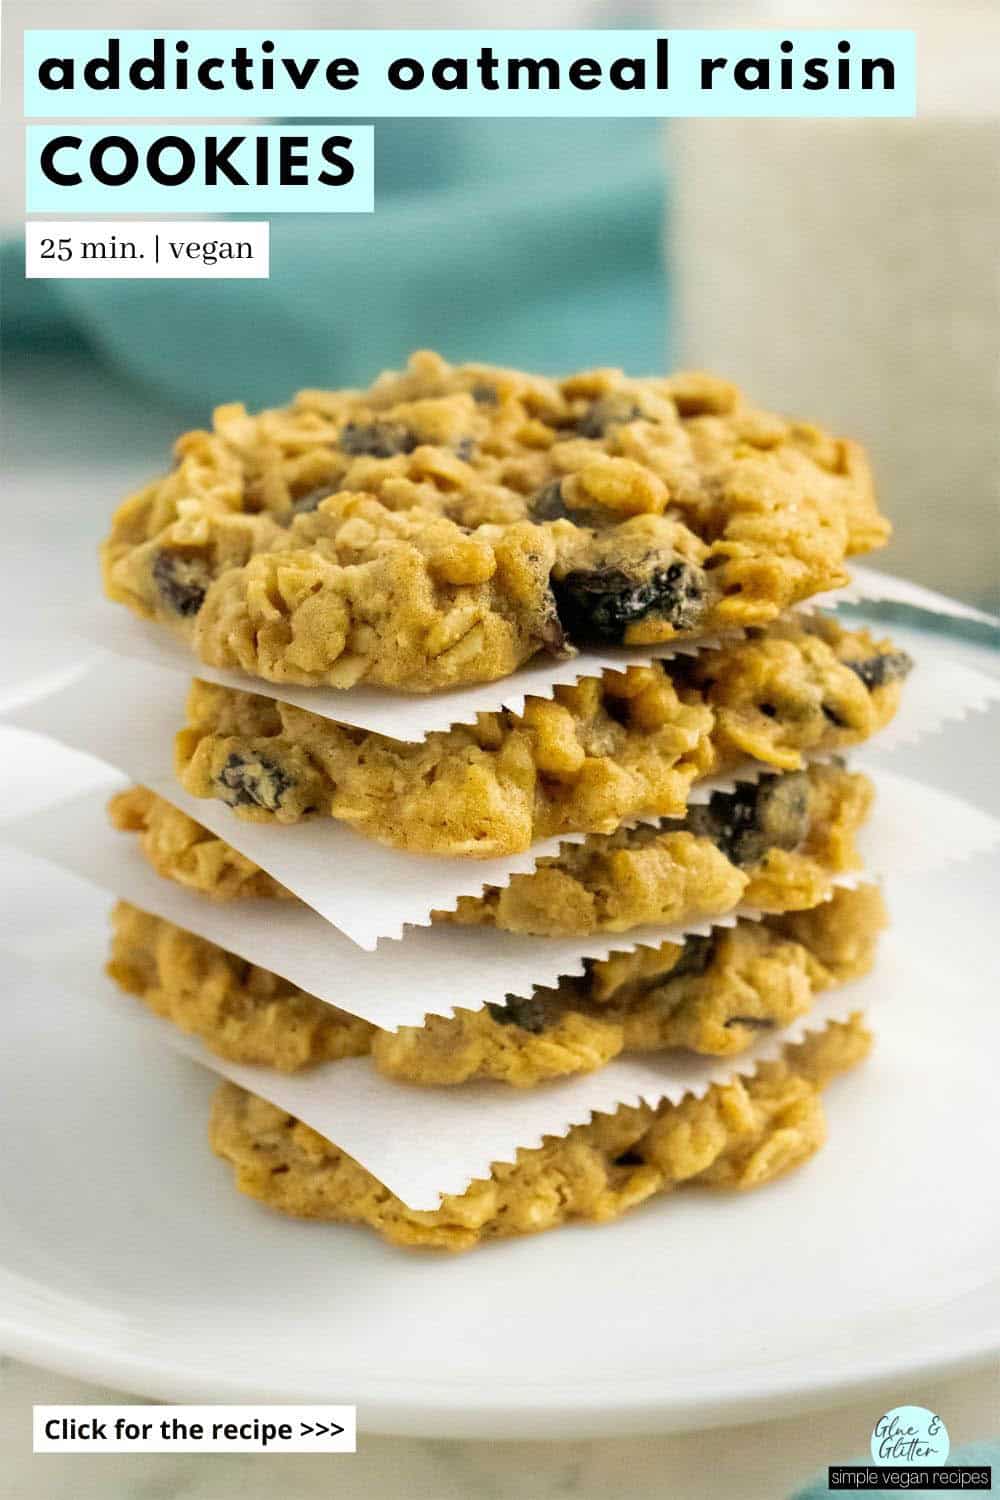 stack of vegan oatmeal raisin cookies on a white plate, text overlay